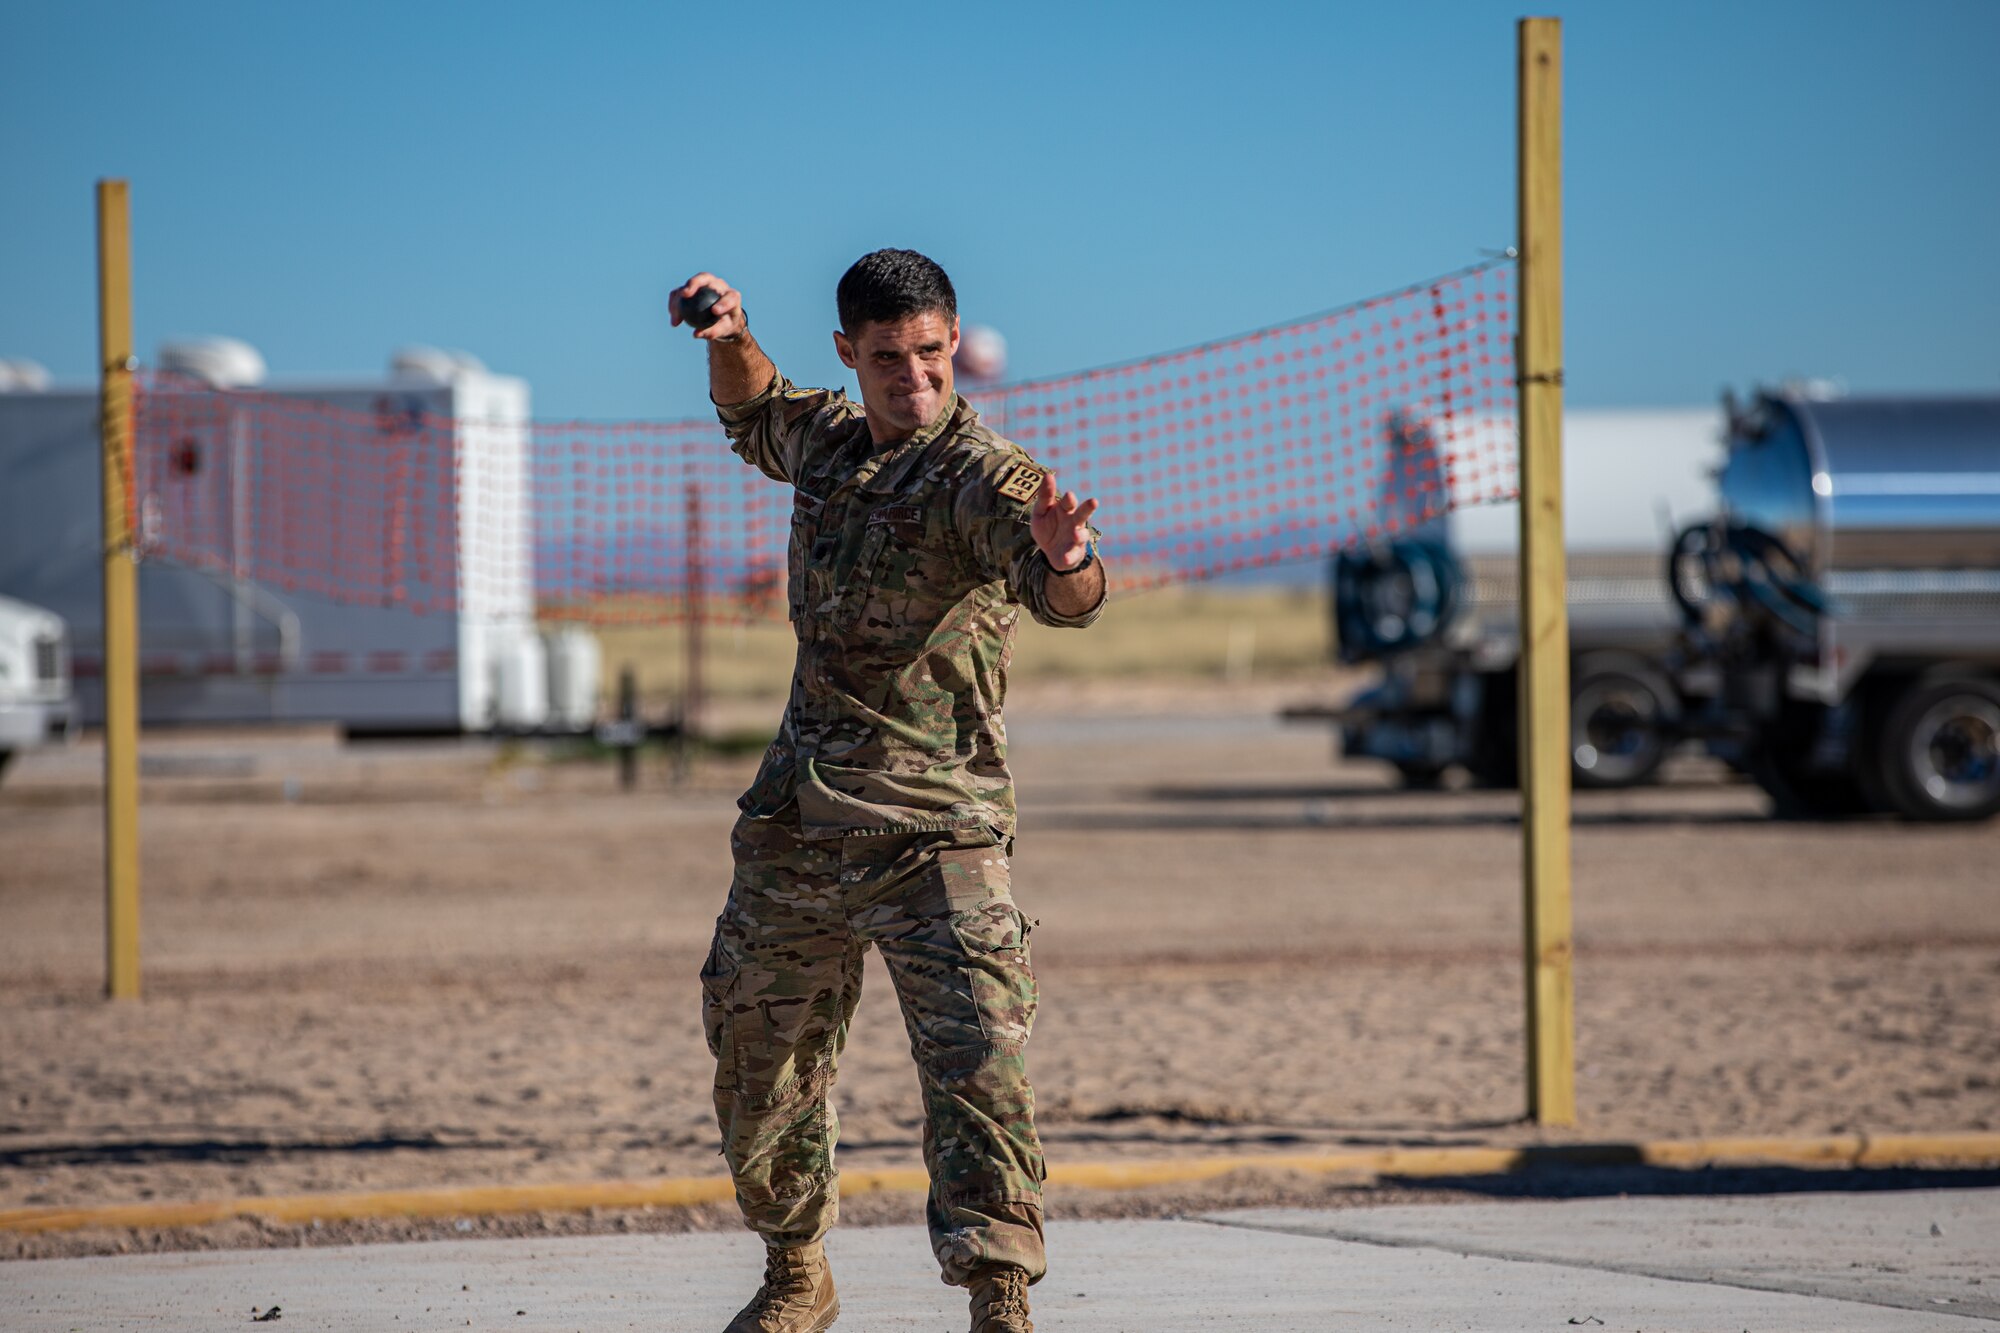 Lt. Col. Michael Hawkins, Task Force-Holloman contracting officer deployed from Seymour Johnson Air Force Base, North Carolina, throws a ball during a cricket game between U.S. service members and Afghan evacuees at Aman Omid Village on Holloman Air Force Base, New Mexico, Oct. 9, 2021. The Department of Defense, through U.S. Northern Command, and in support of the Department of Homeland Security, is providing transportation, temporary housing, medical screening, and general support for at least 50,000 Afghan evacuees at suitable facilities, in permanent or temporary structures, as quickly as possible. This initiative provides Afghan personnel essential support at secure locations outside Afghanistan. (U.S. Army photo by Pfc. Anthony Sanchez)